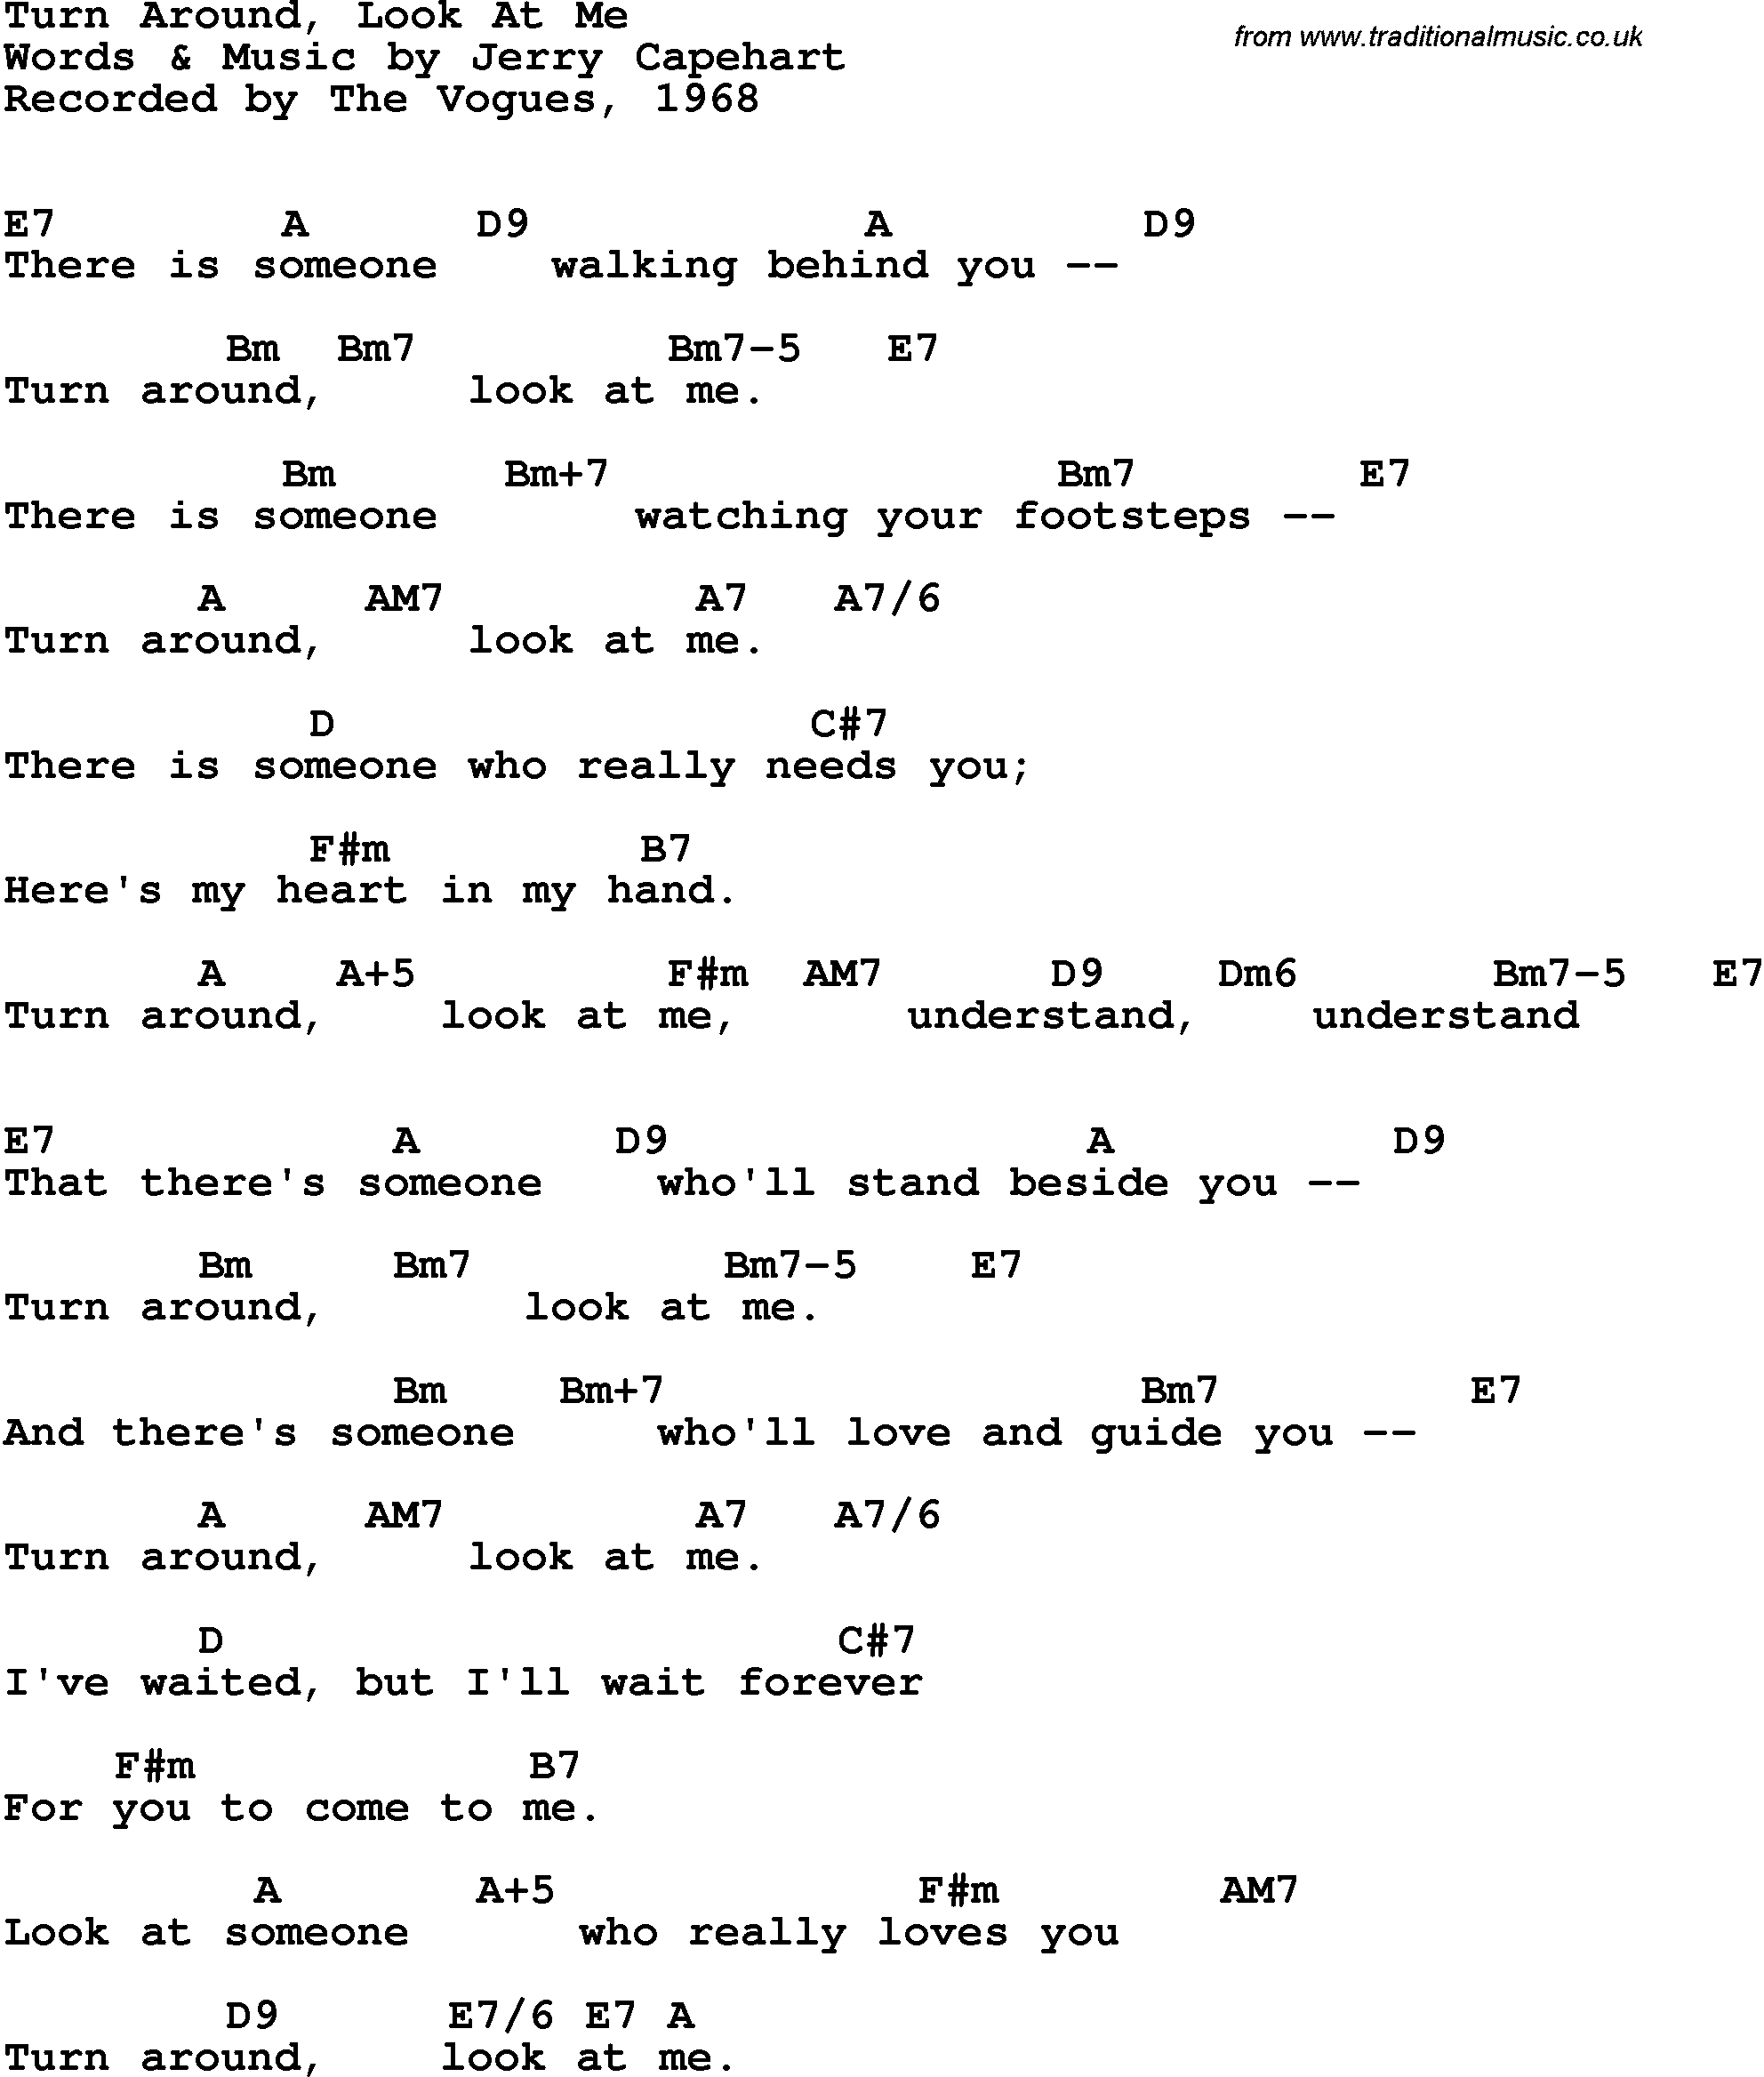 Song Lyrics with guitar chords for Turn Around, Look At Me - The Vogues, 1968